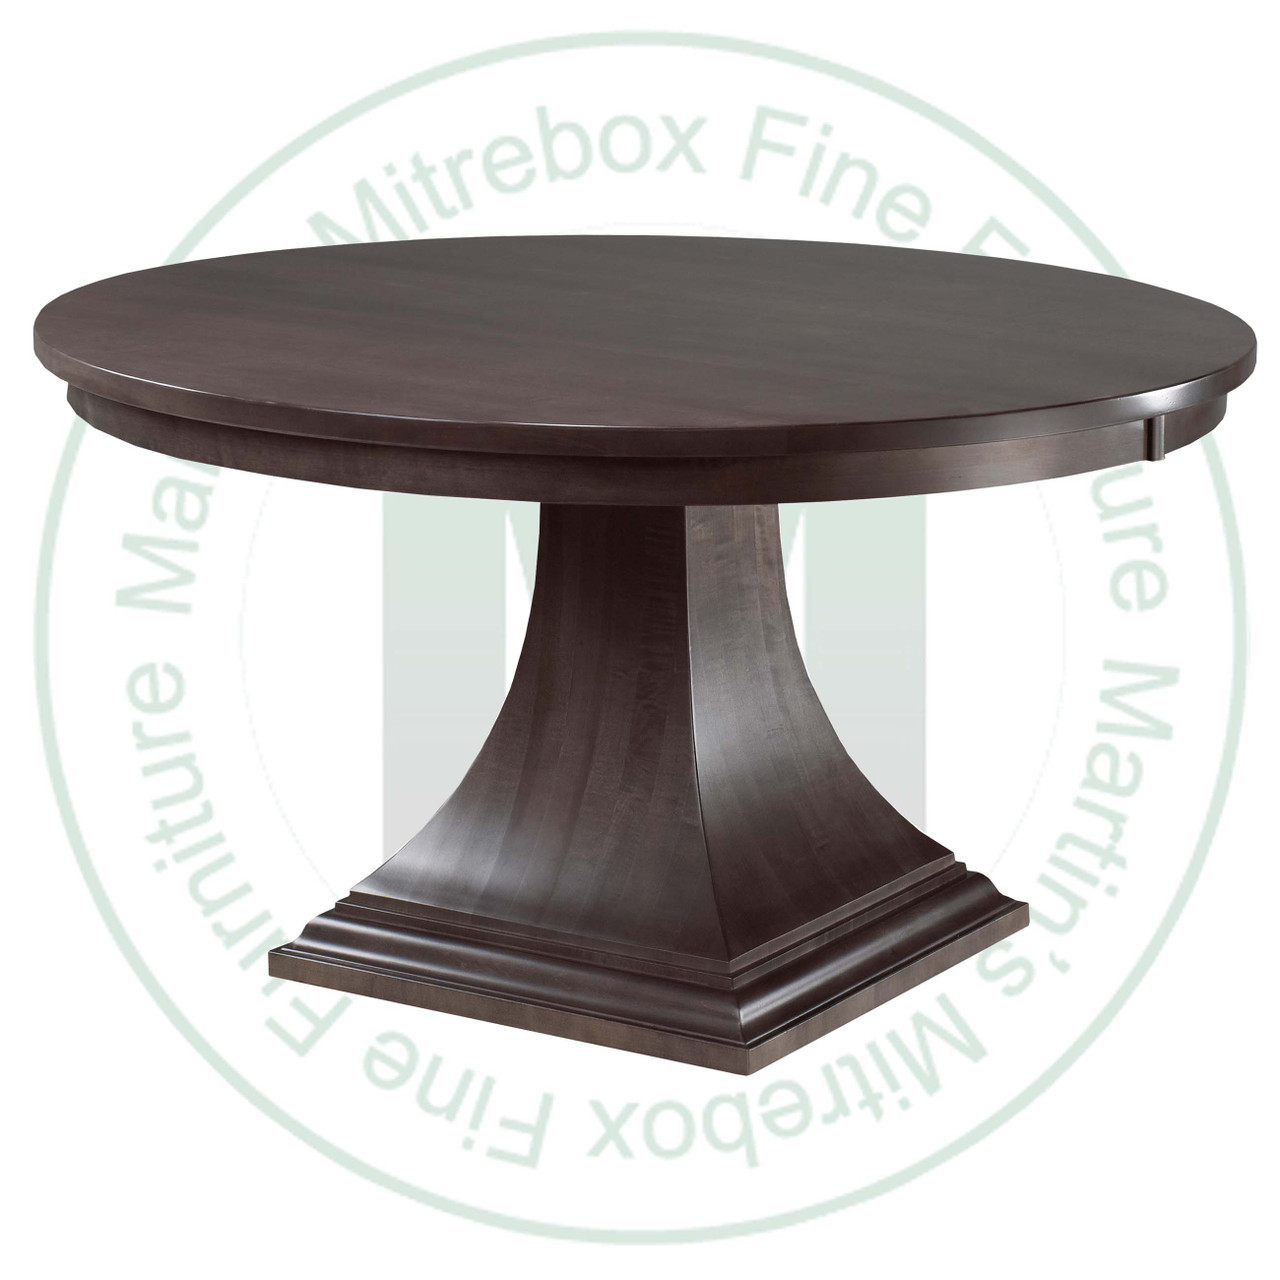 Oak Key West Single Pedestal Table 54''D x 54''W x 30''H With 1 - 12'' Leaf Table Table Has 1'' Thick Top